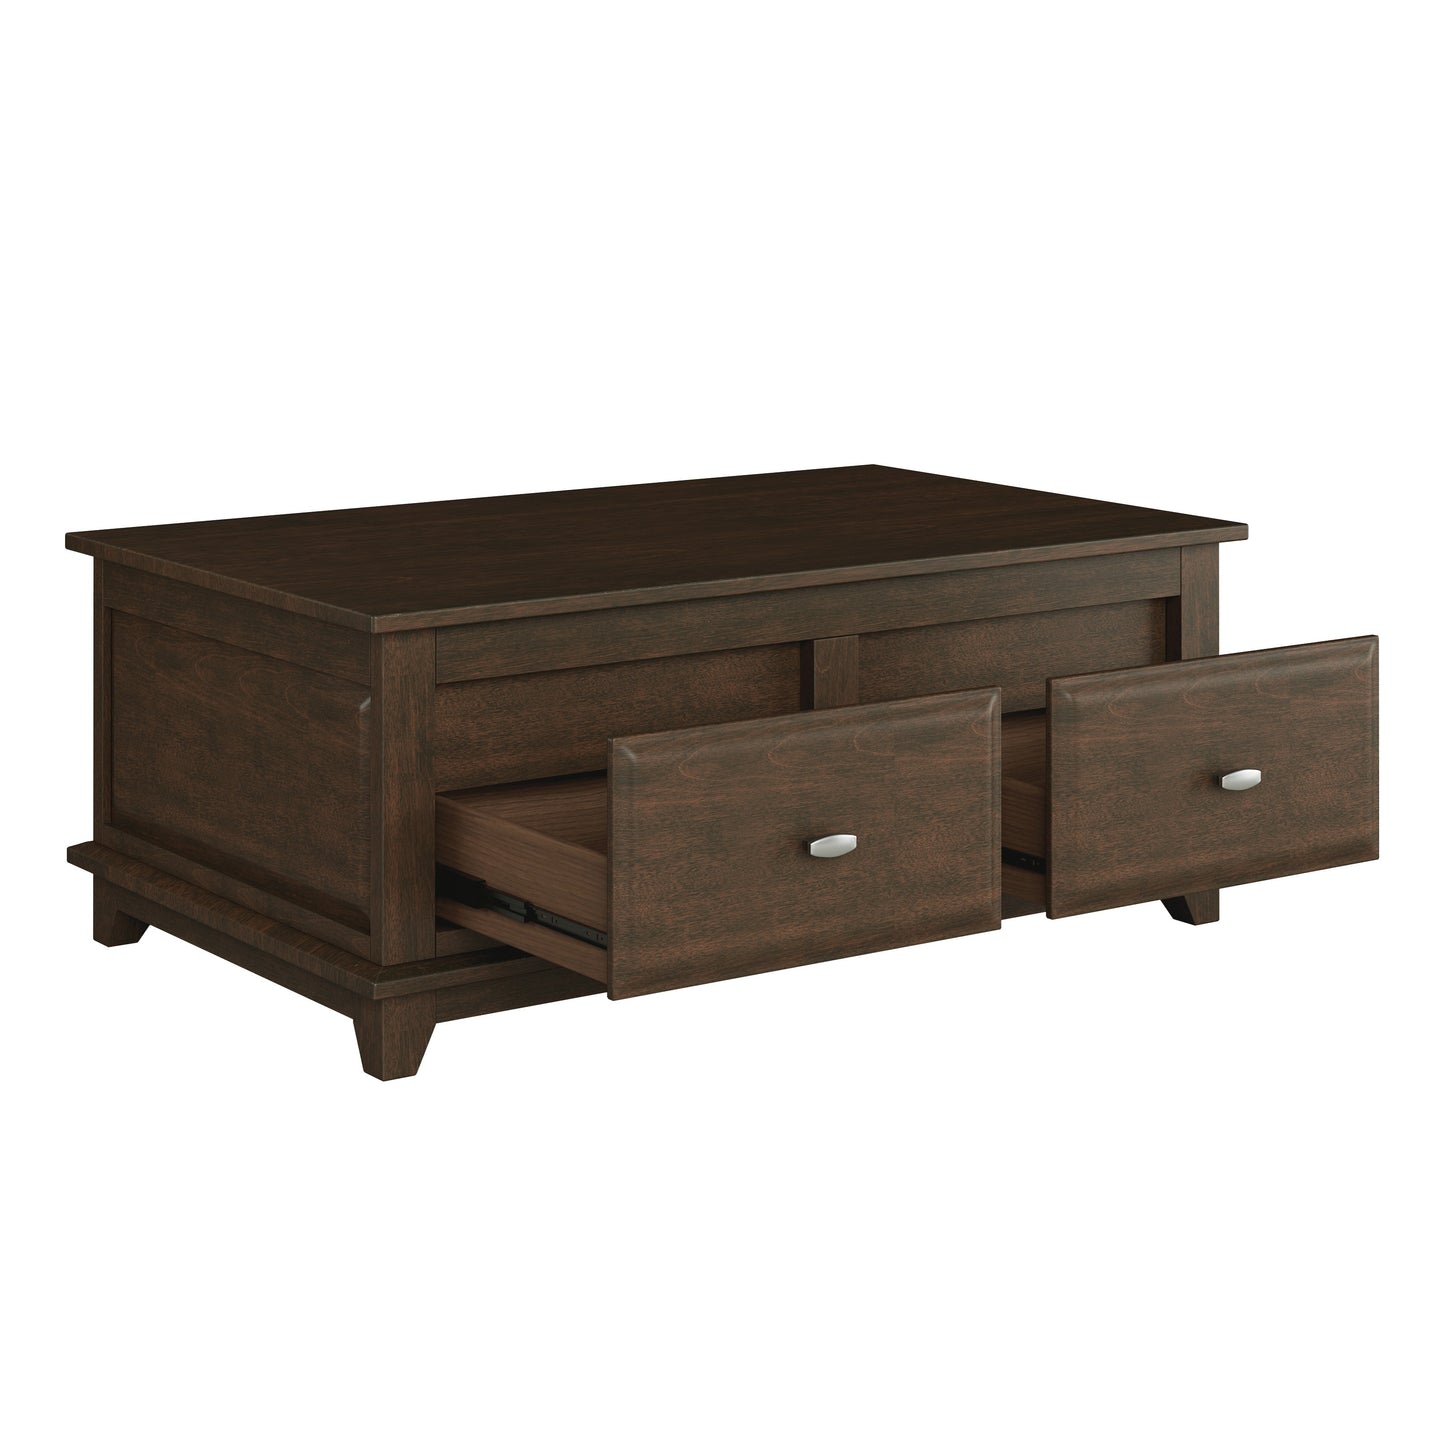 Minot Lift Top Coffee Table BROWN CHERRY ONLY